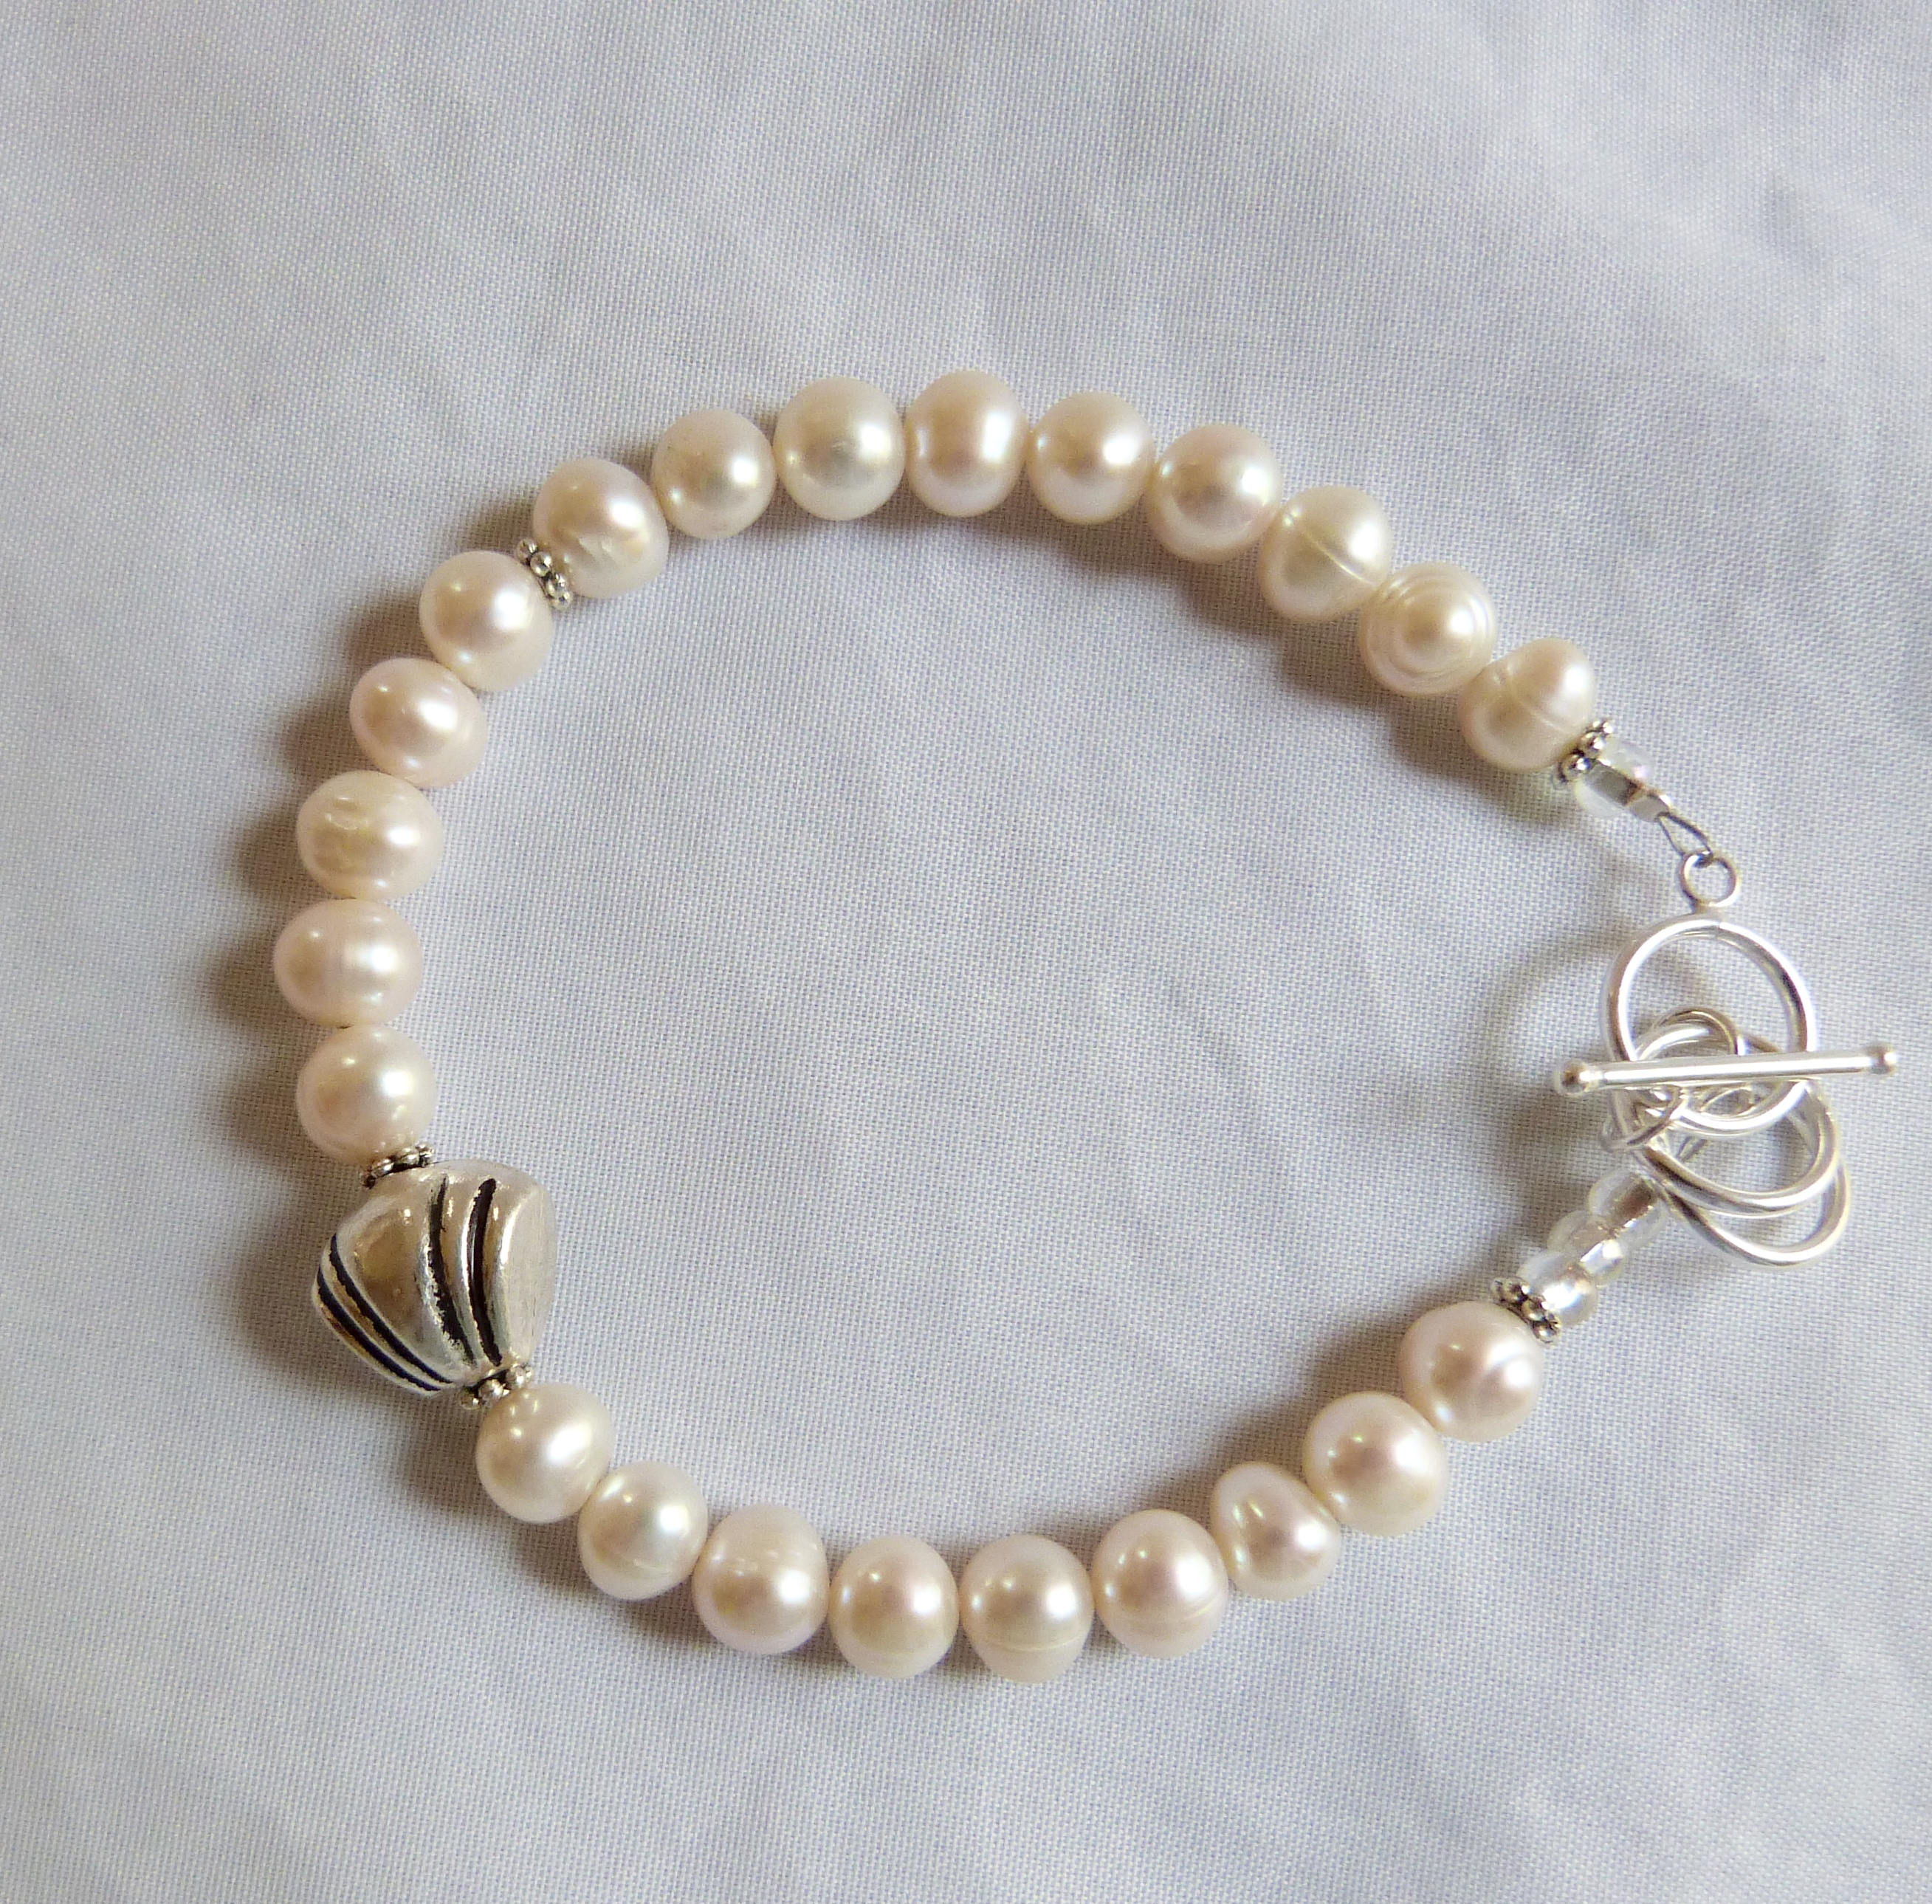 PEARL and Sterling Silver SHELL Bracelet - Etsy